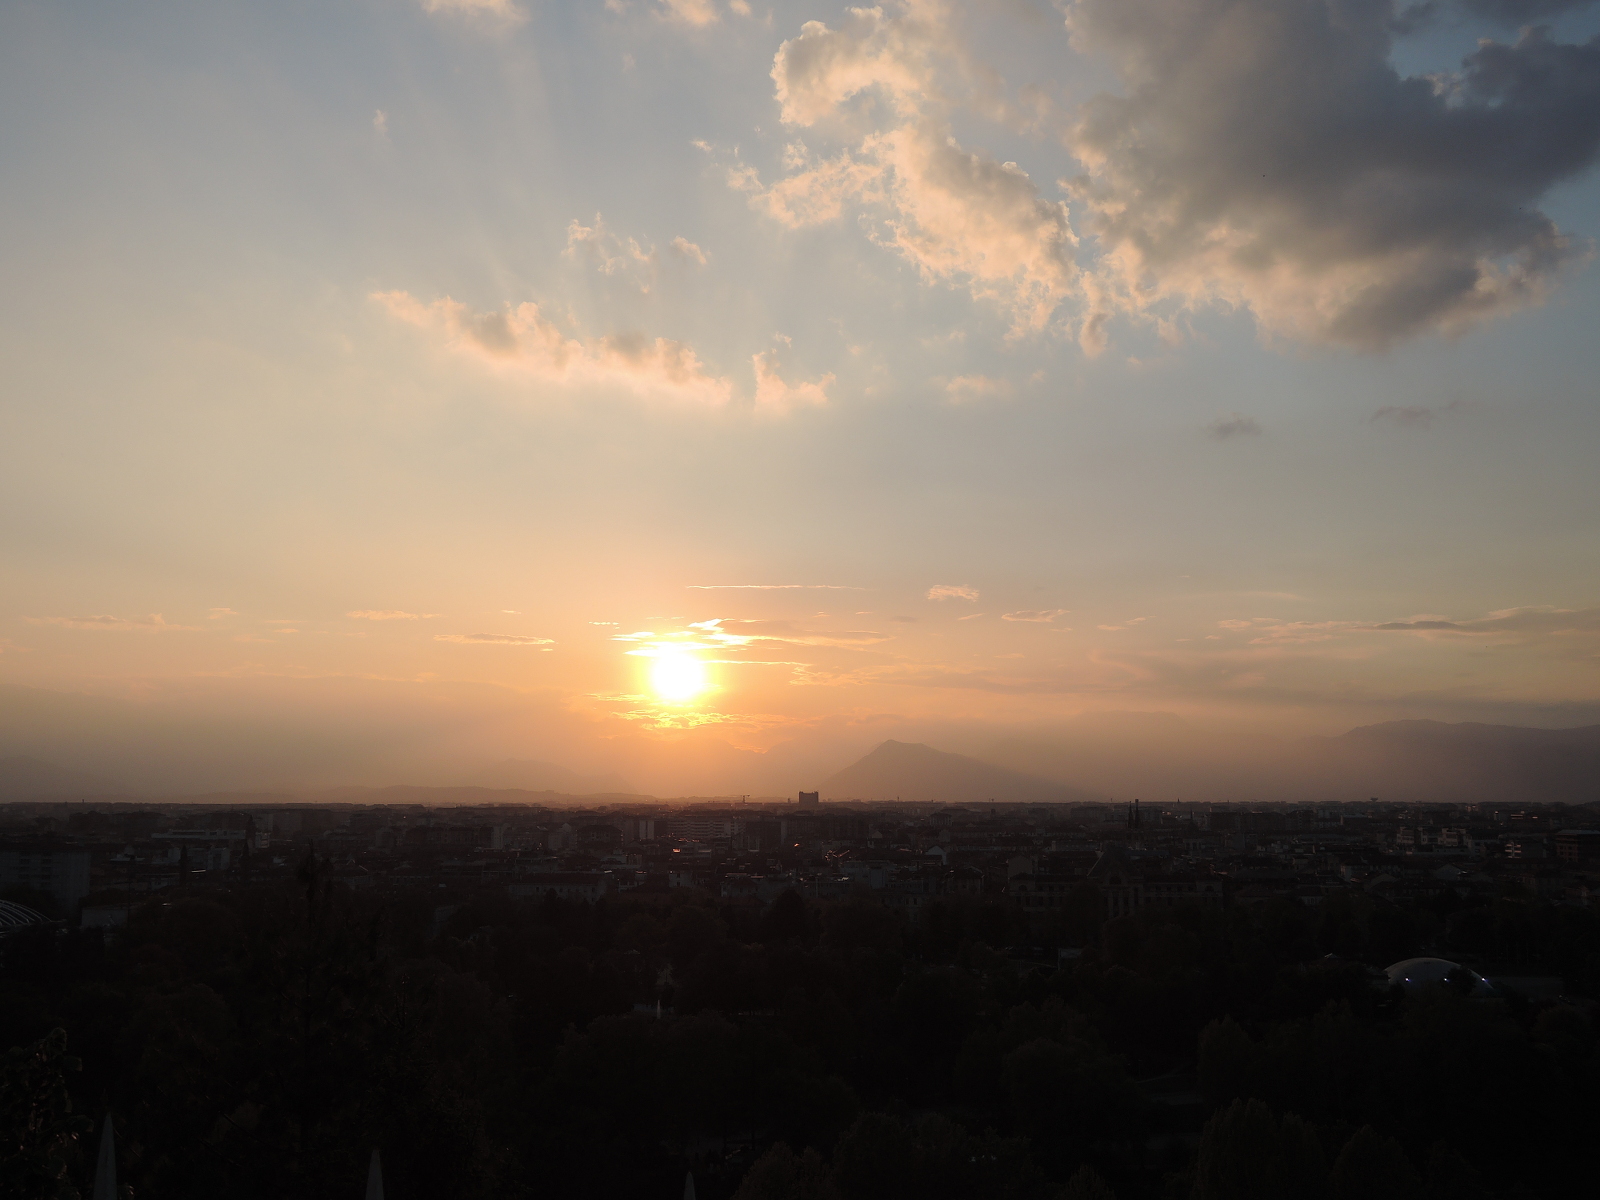 The sunset over Turin...